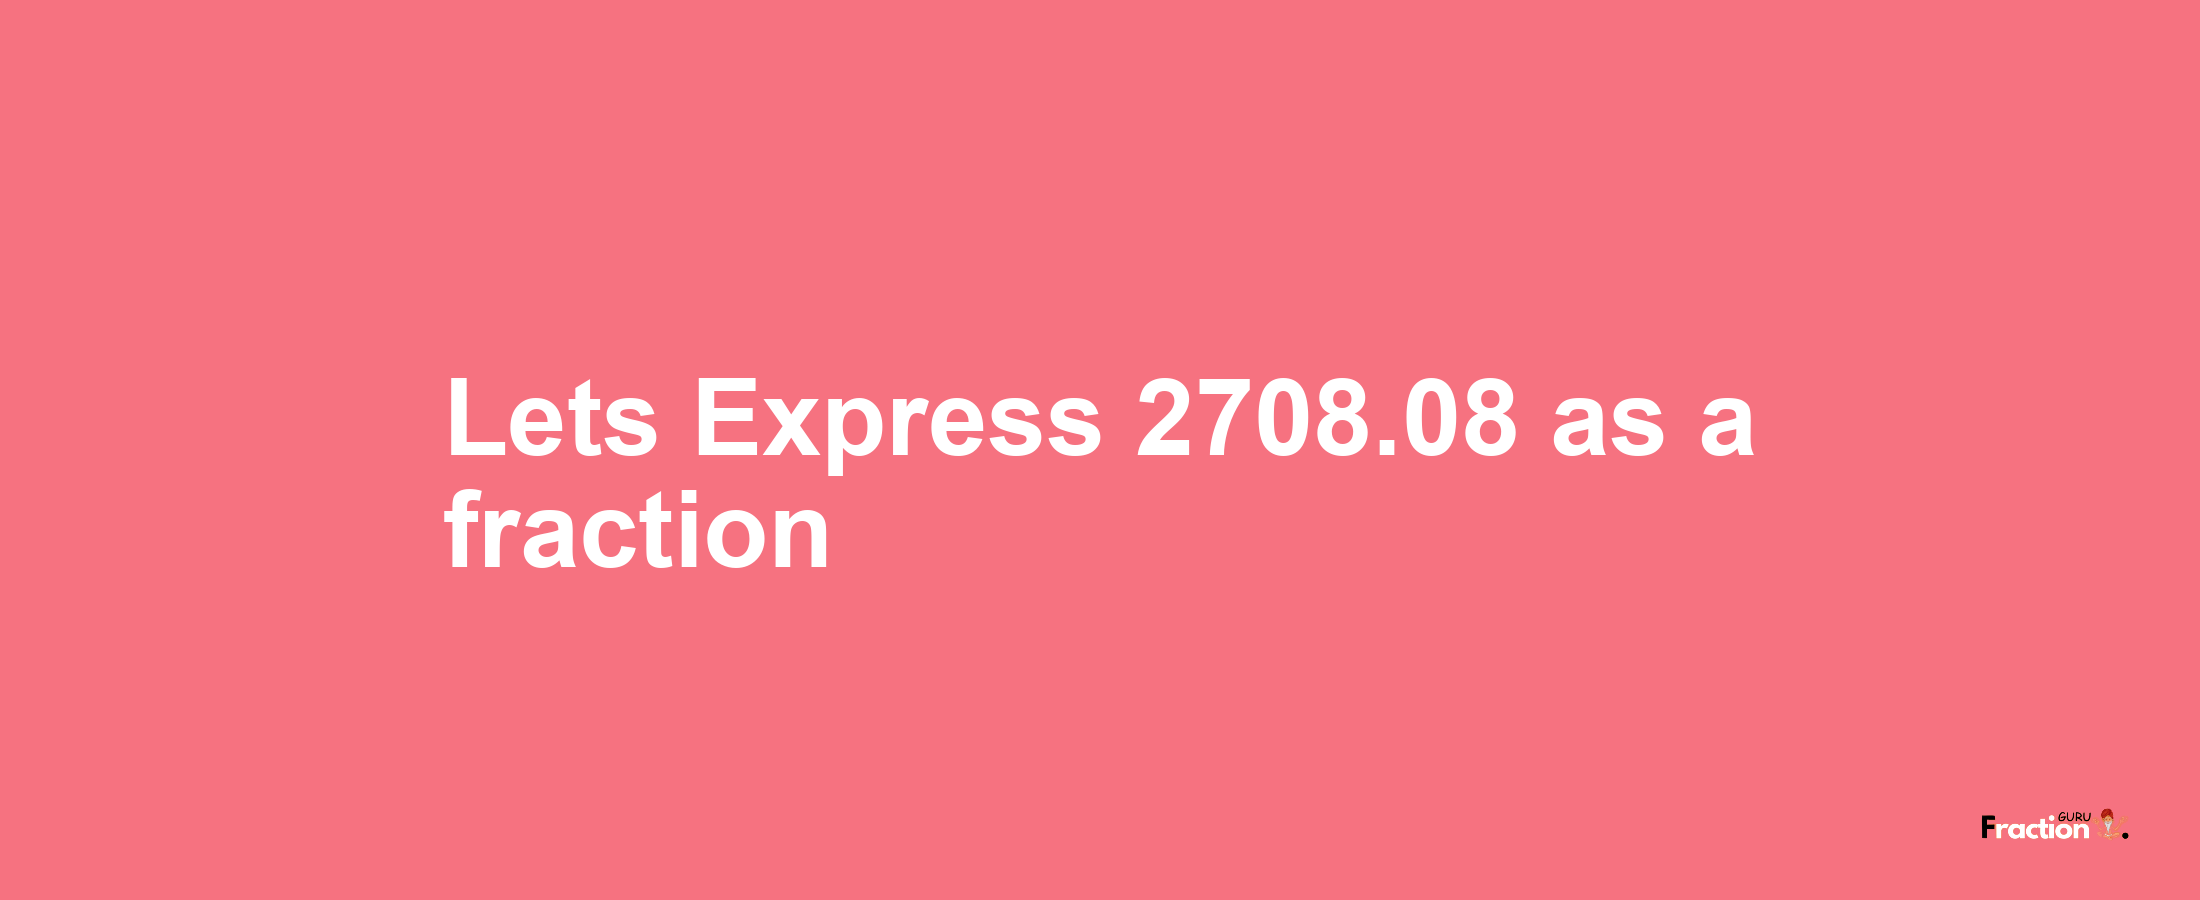 Lets Express 2708.08 as afraction